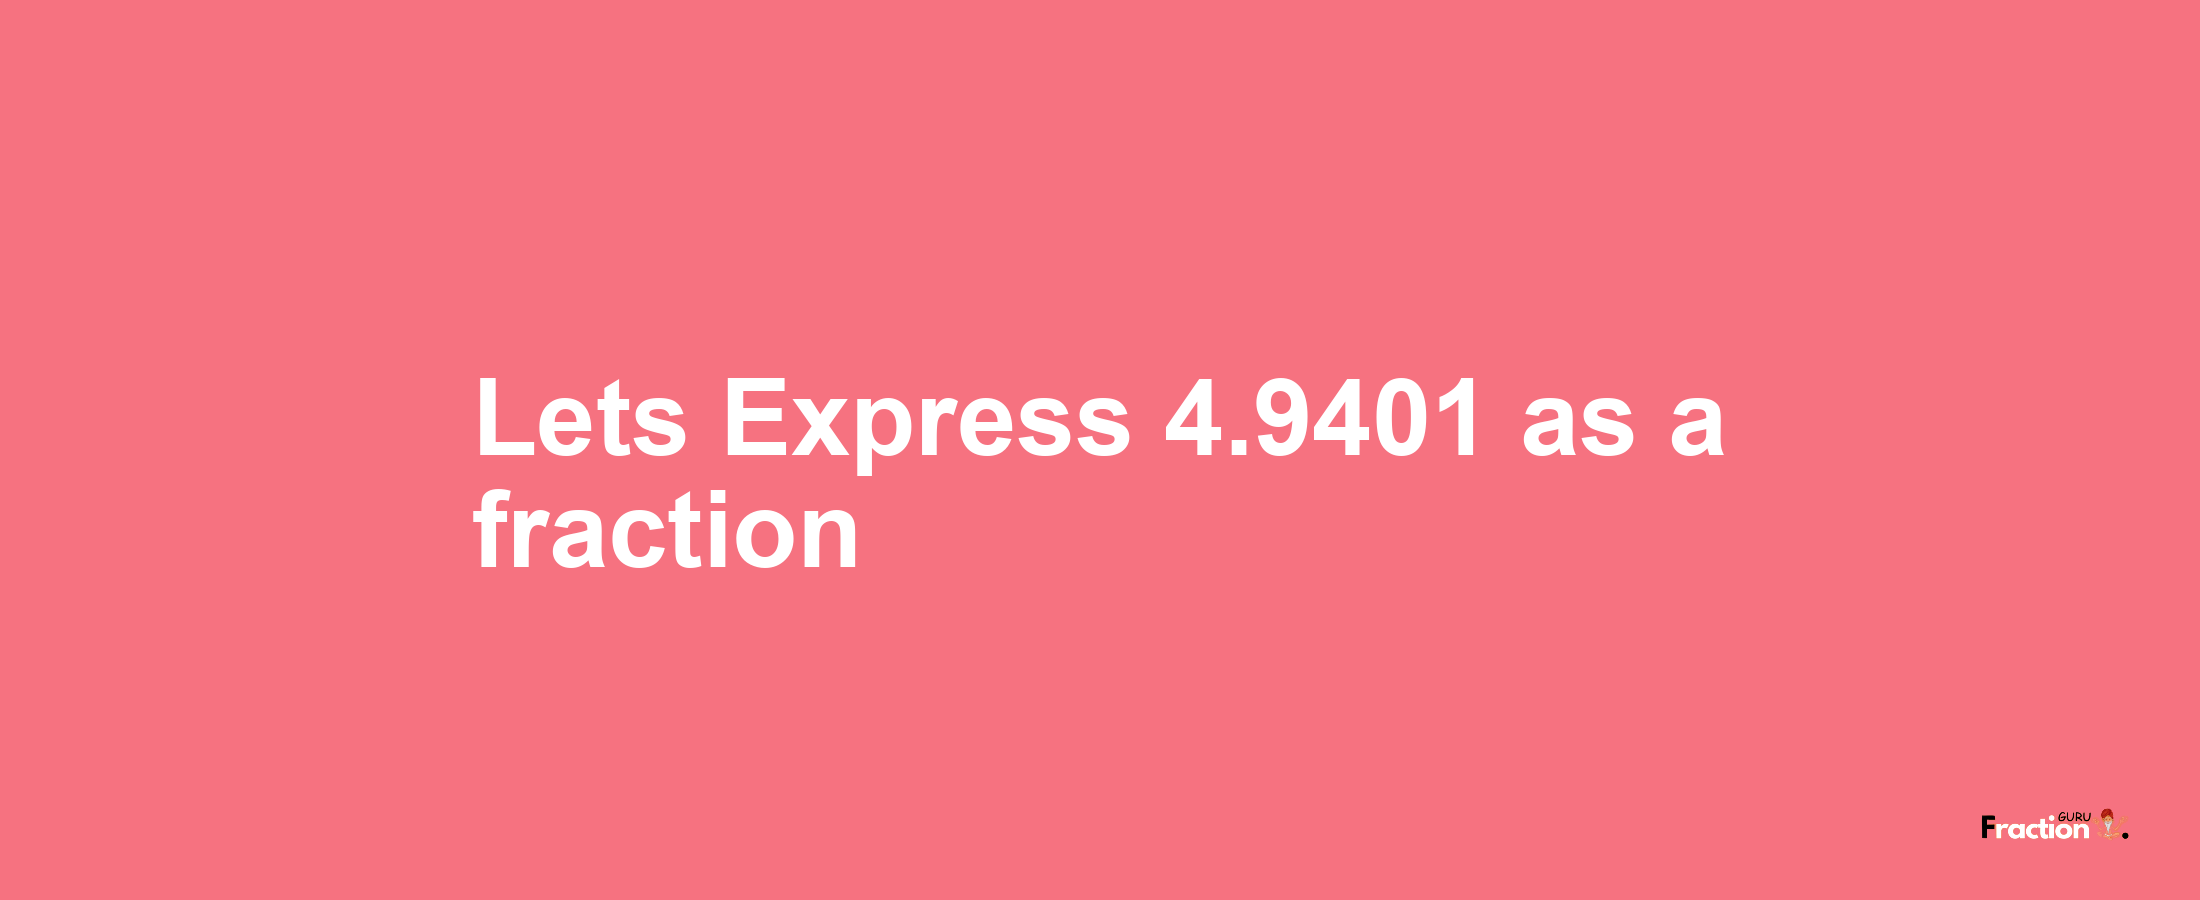 Lets Express 4.9401 as afraction